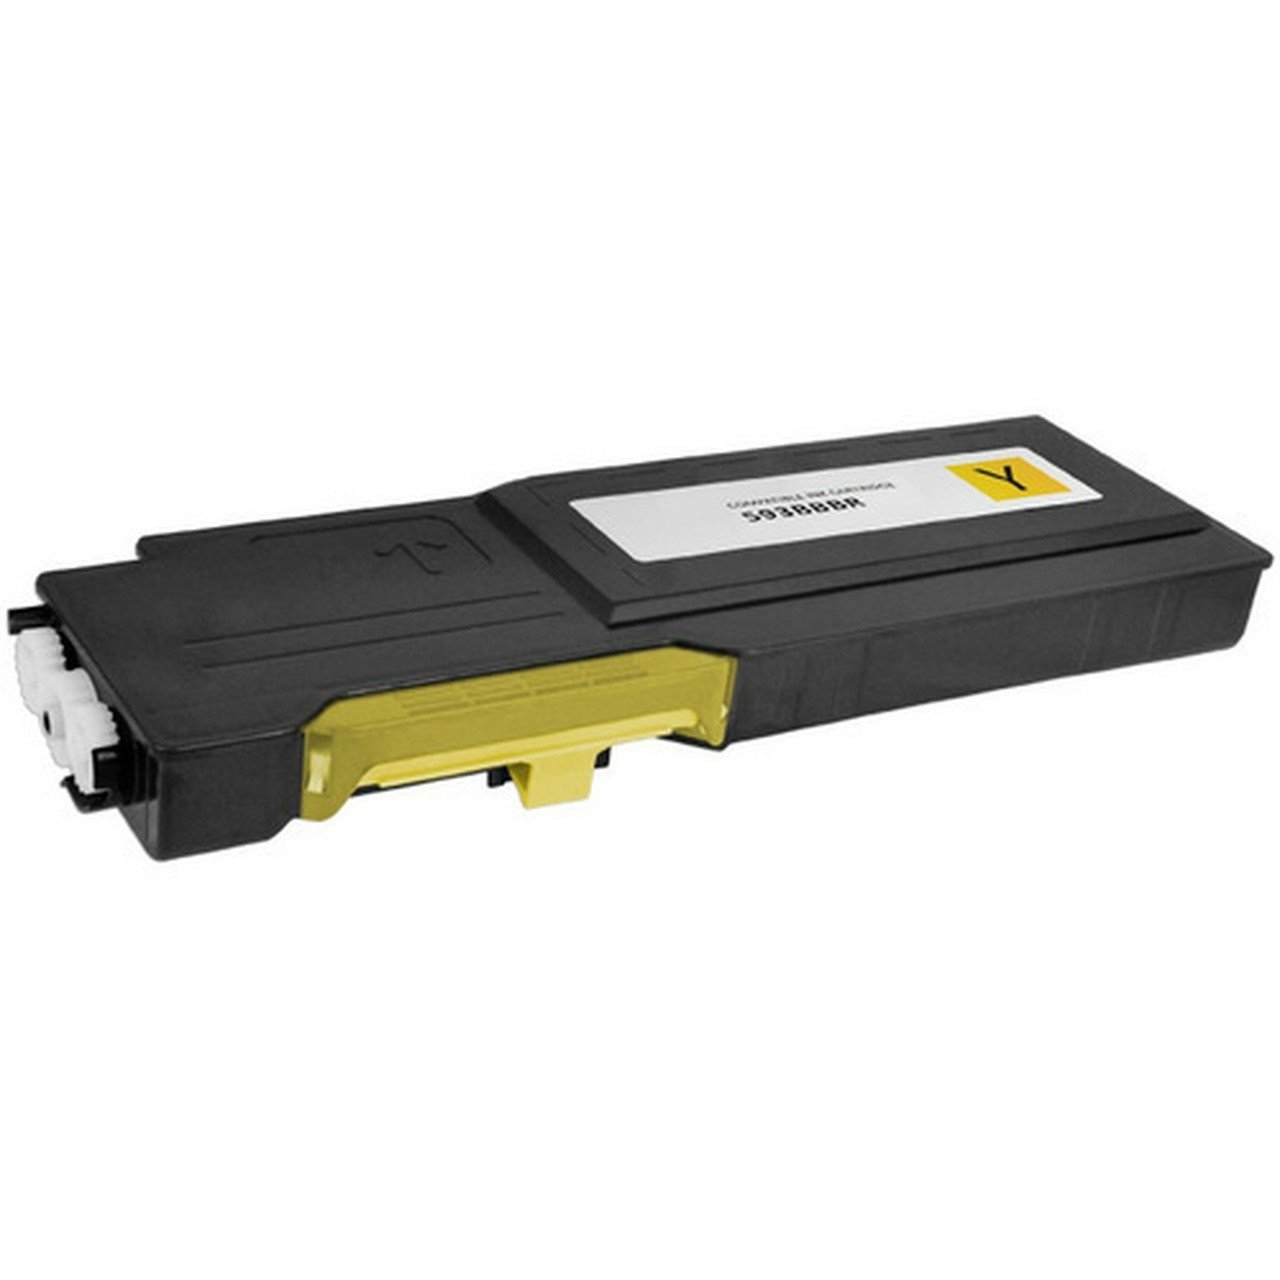 Absolute Toner Compatible Dell 593-BBBR Yellow High Yield Laser Toner Cartridge | Absolute Toner Dell Toner Cartridges